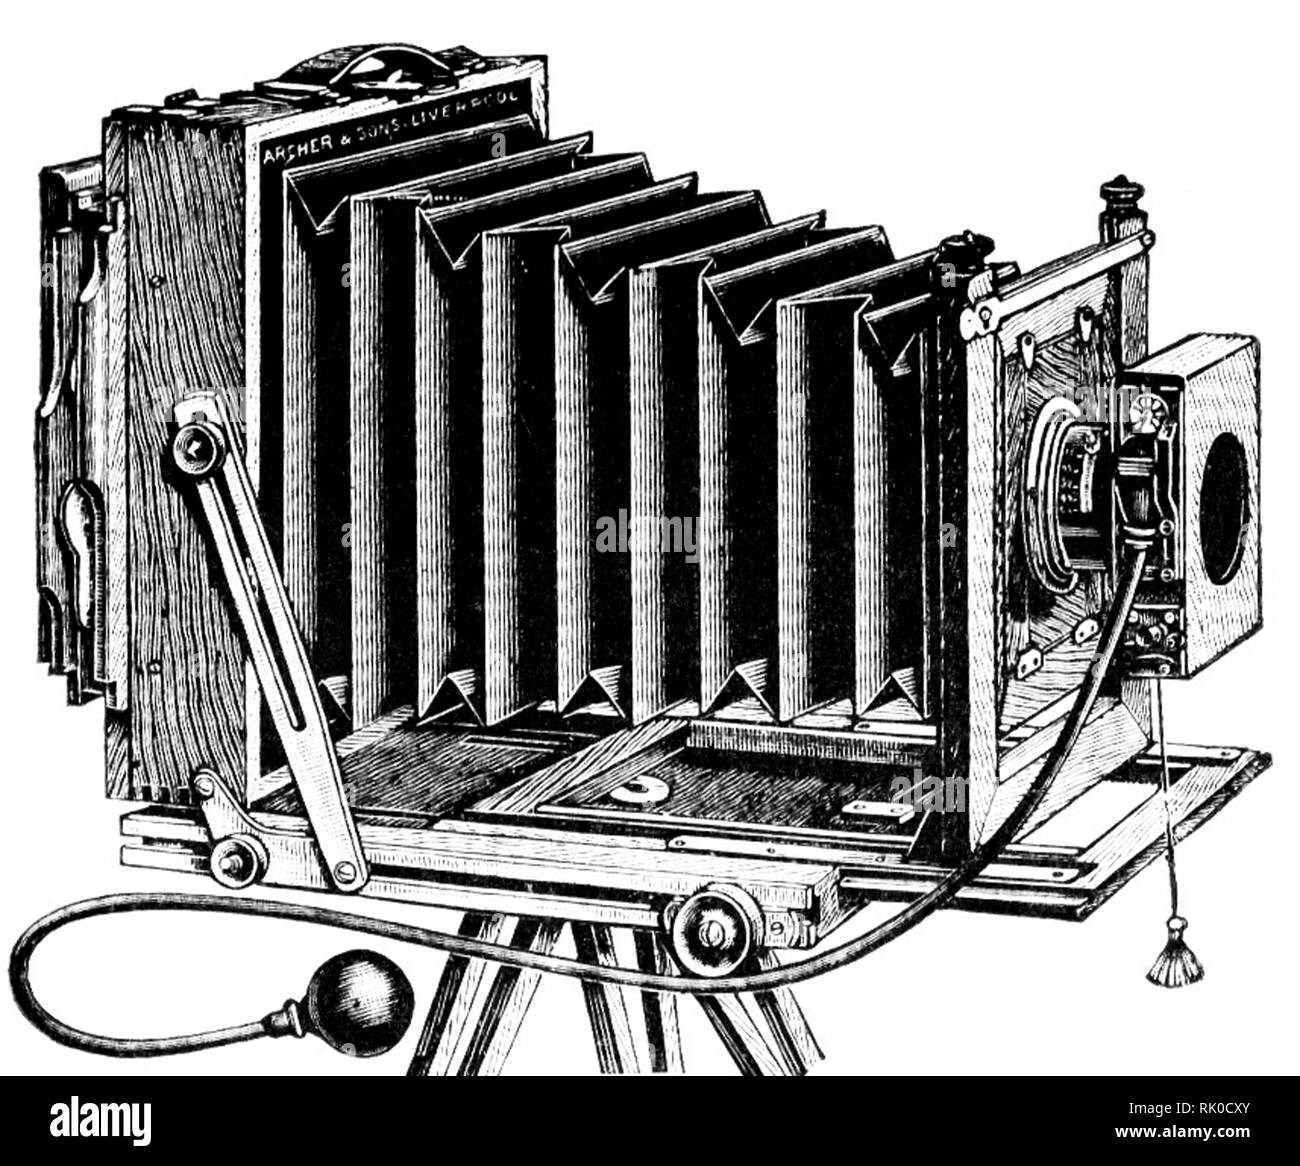 Vintage old photographic plate camera - this was made by Archer & Sons of Liverpool Stock Photo